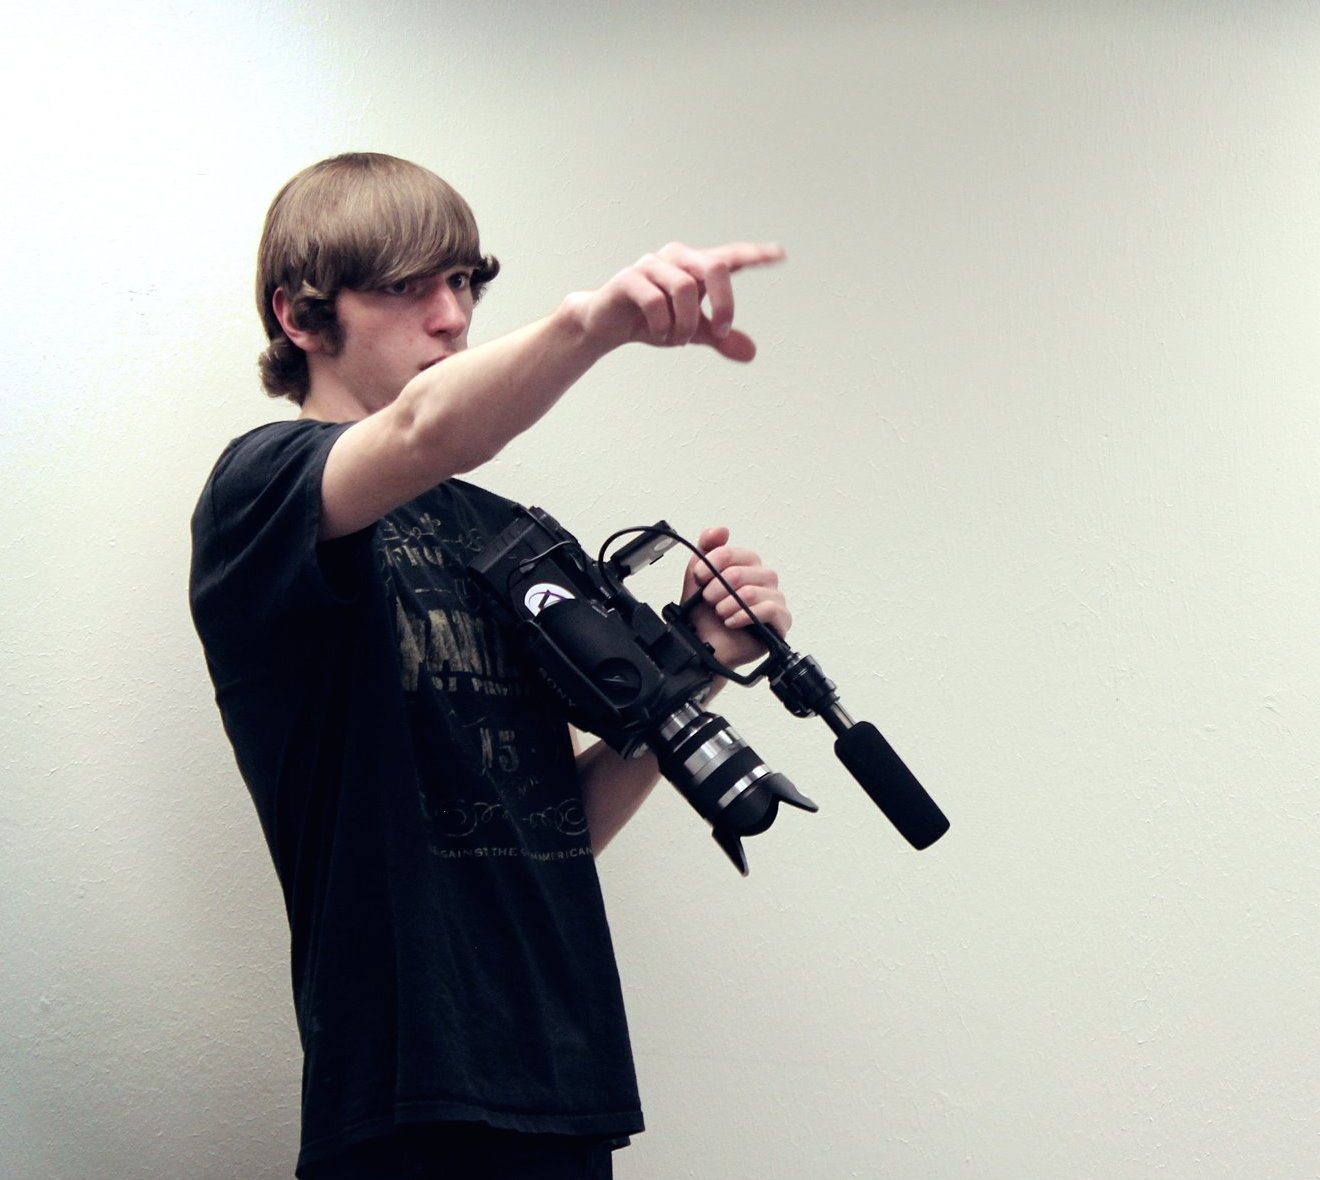 Luke Ostermiller on set of student film at Warren Career and Technical School.